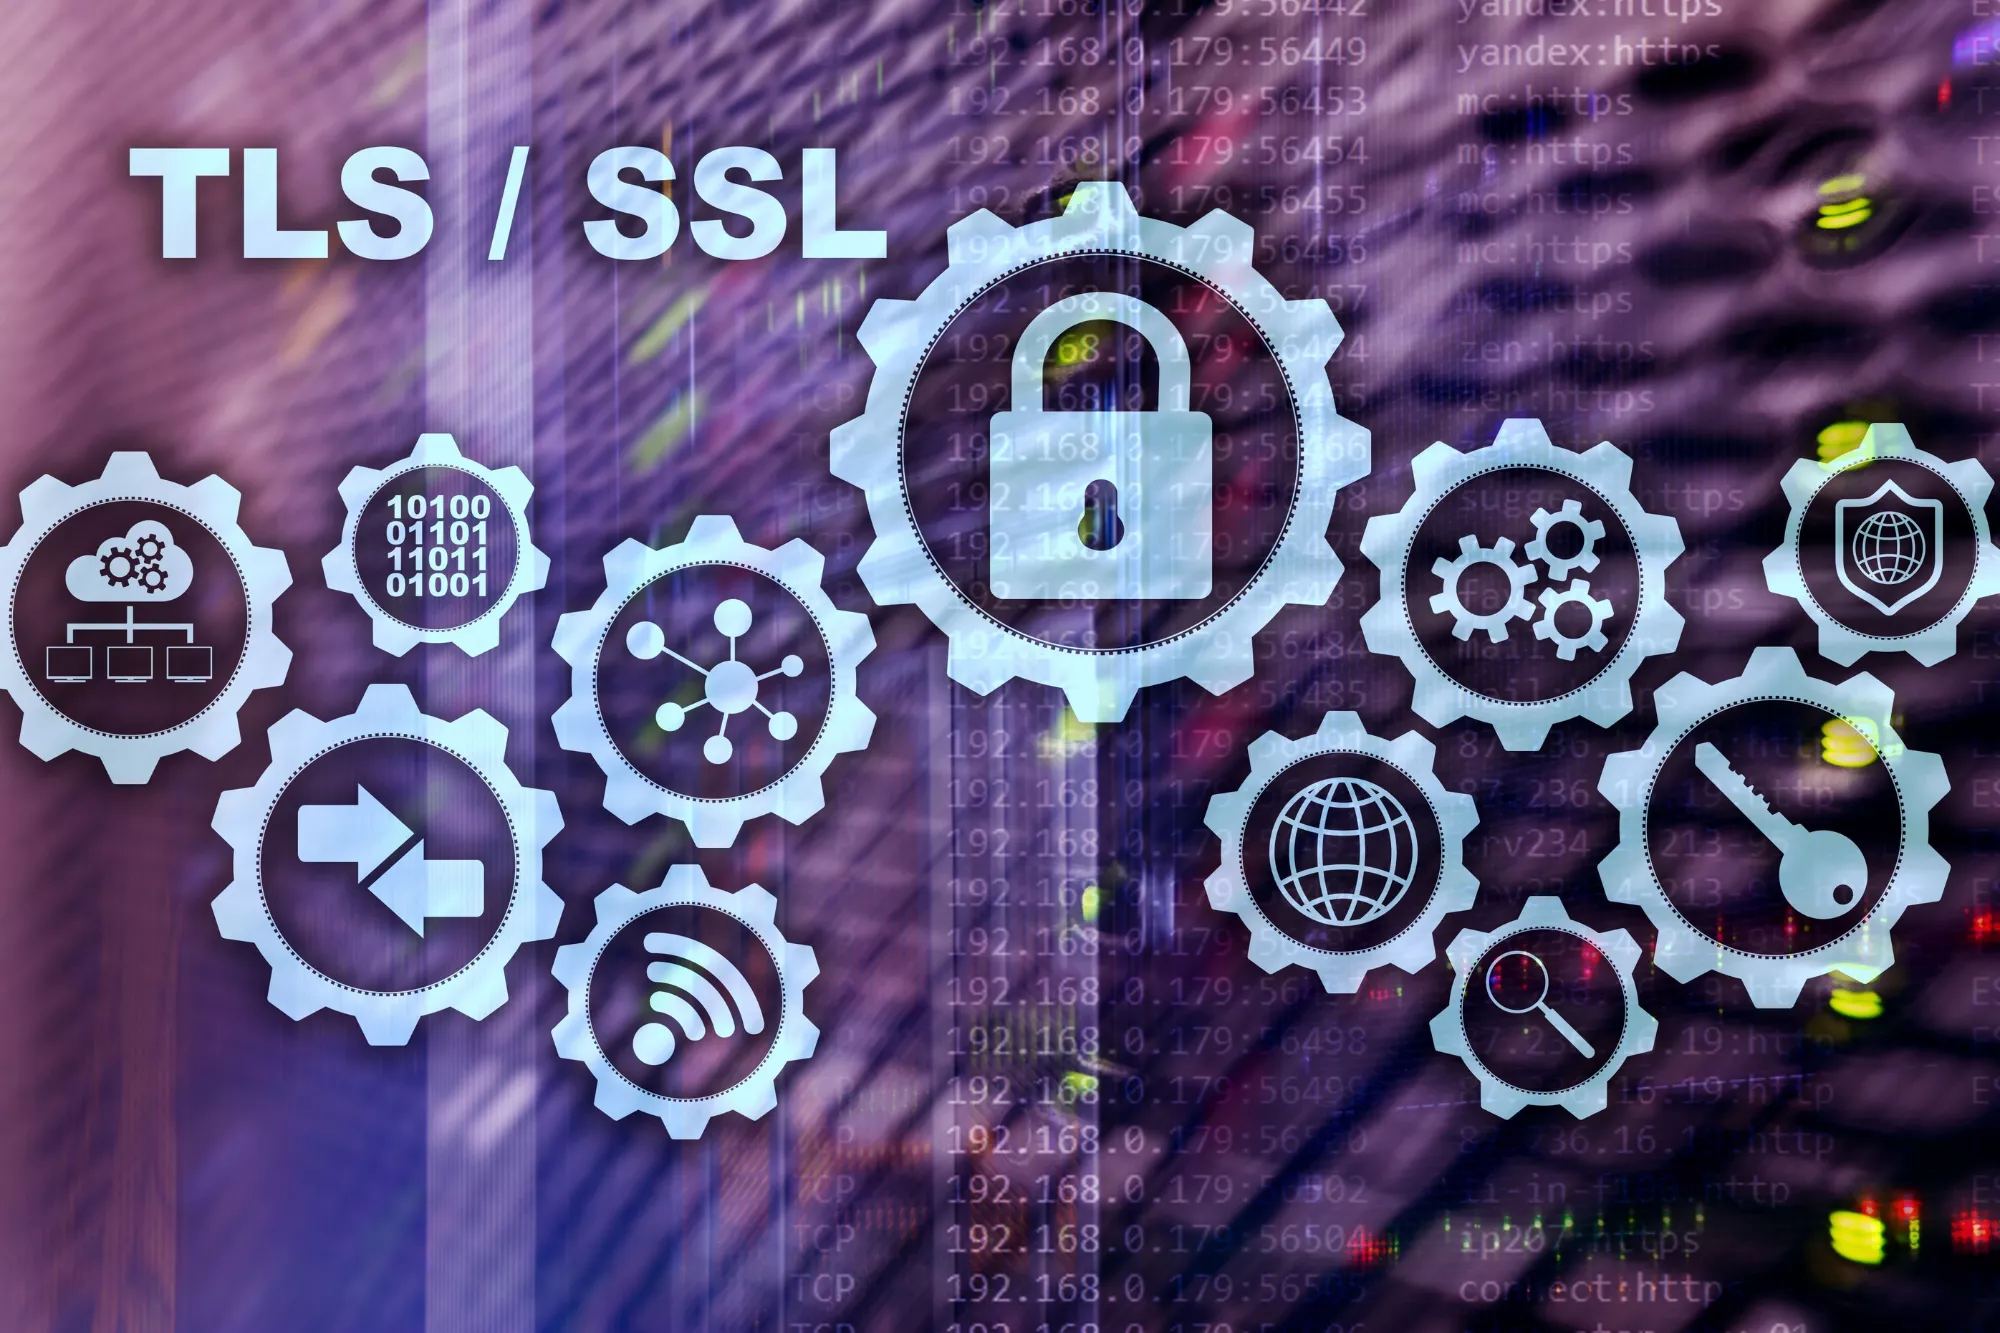 System wheels with different icons in them and TLS/SSL written.